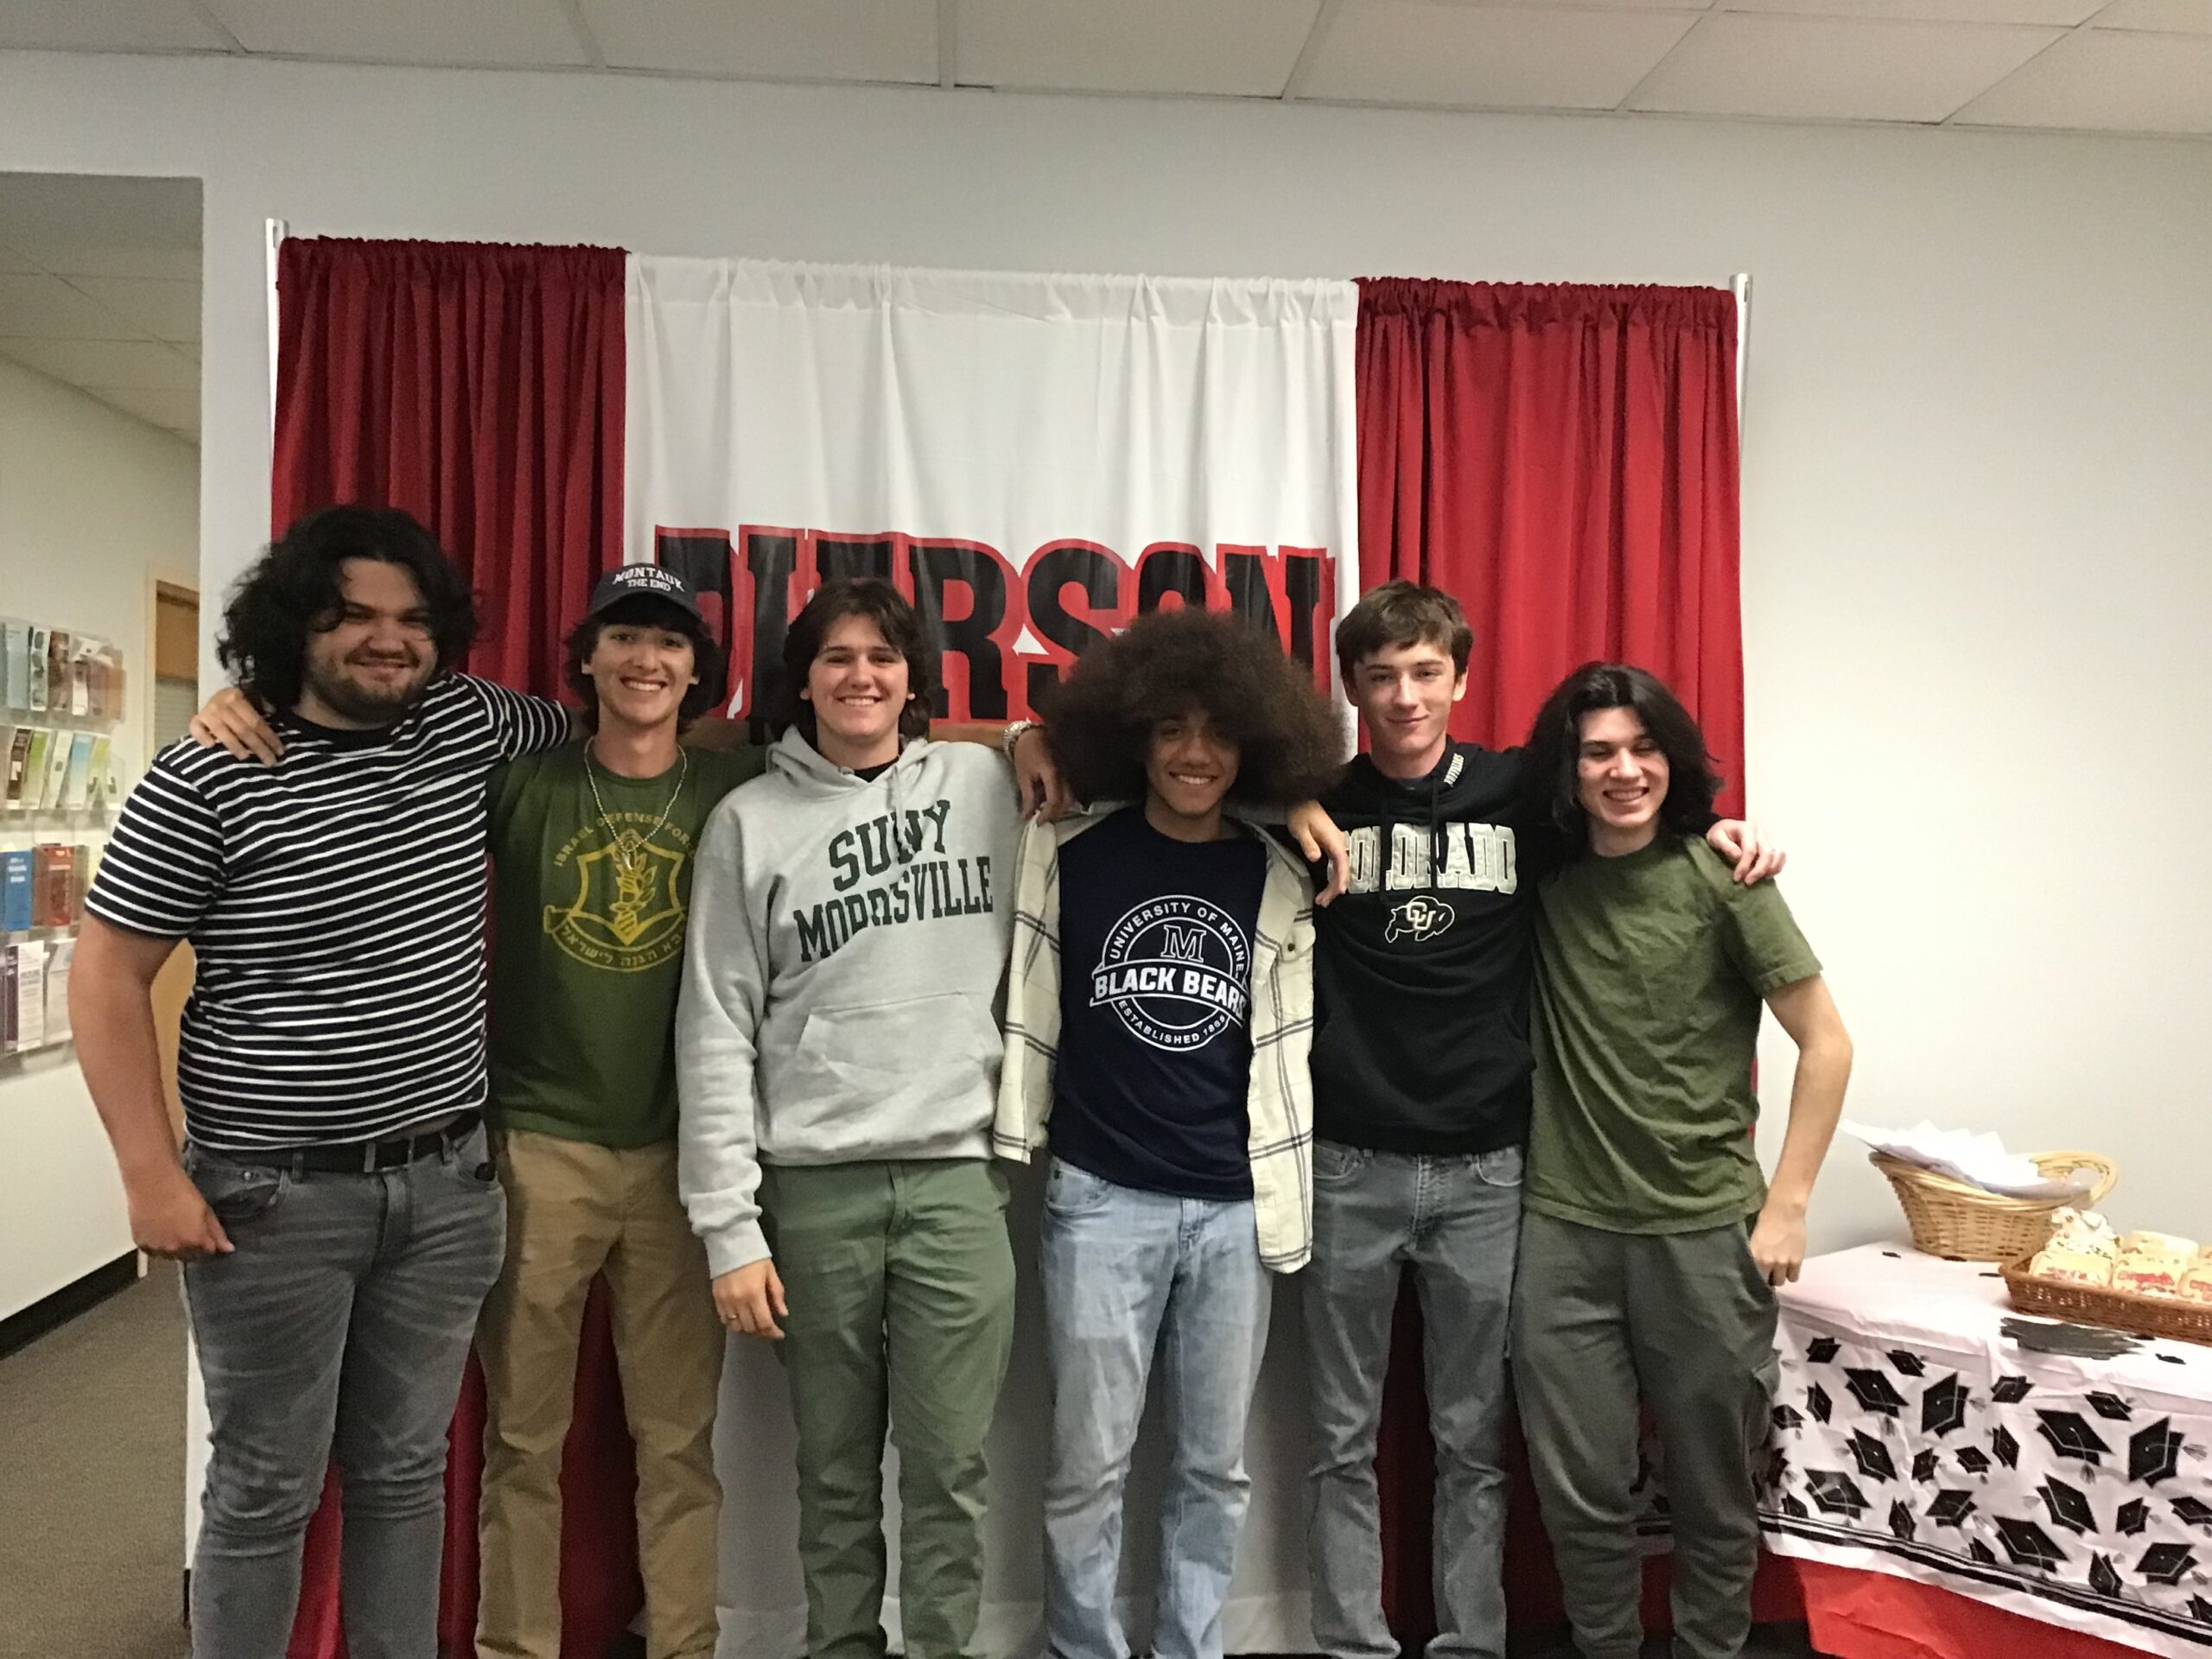 Pierson High School seniors Lukas Montiero, Daniel Bitton, John Nill, Jaylen Cooks, Owen Caufield and Zachary Vaccaro celebrated Pierson’s Decision Day. According to Pierson guidance counselor Margaret Motto, “Decisions Day is celebrating each student's formal decision to graduate and choose a new path. We are honoring not just chosen colleges but also those entering the workforce, military service or other training paths as well.” COURTESY SAG HARBOR SCHOOL DISTRICT